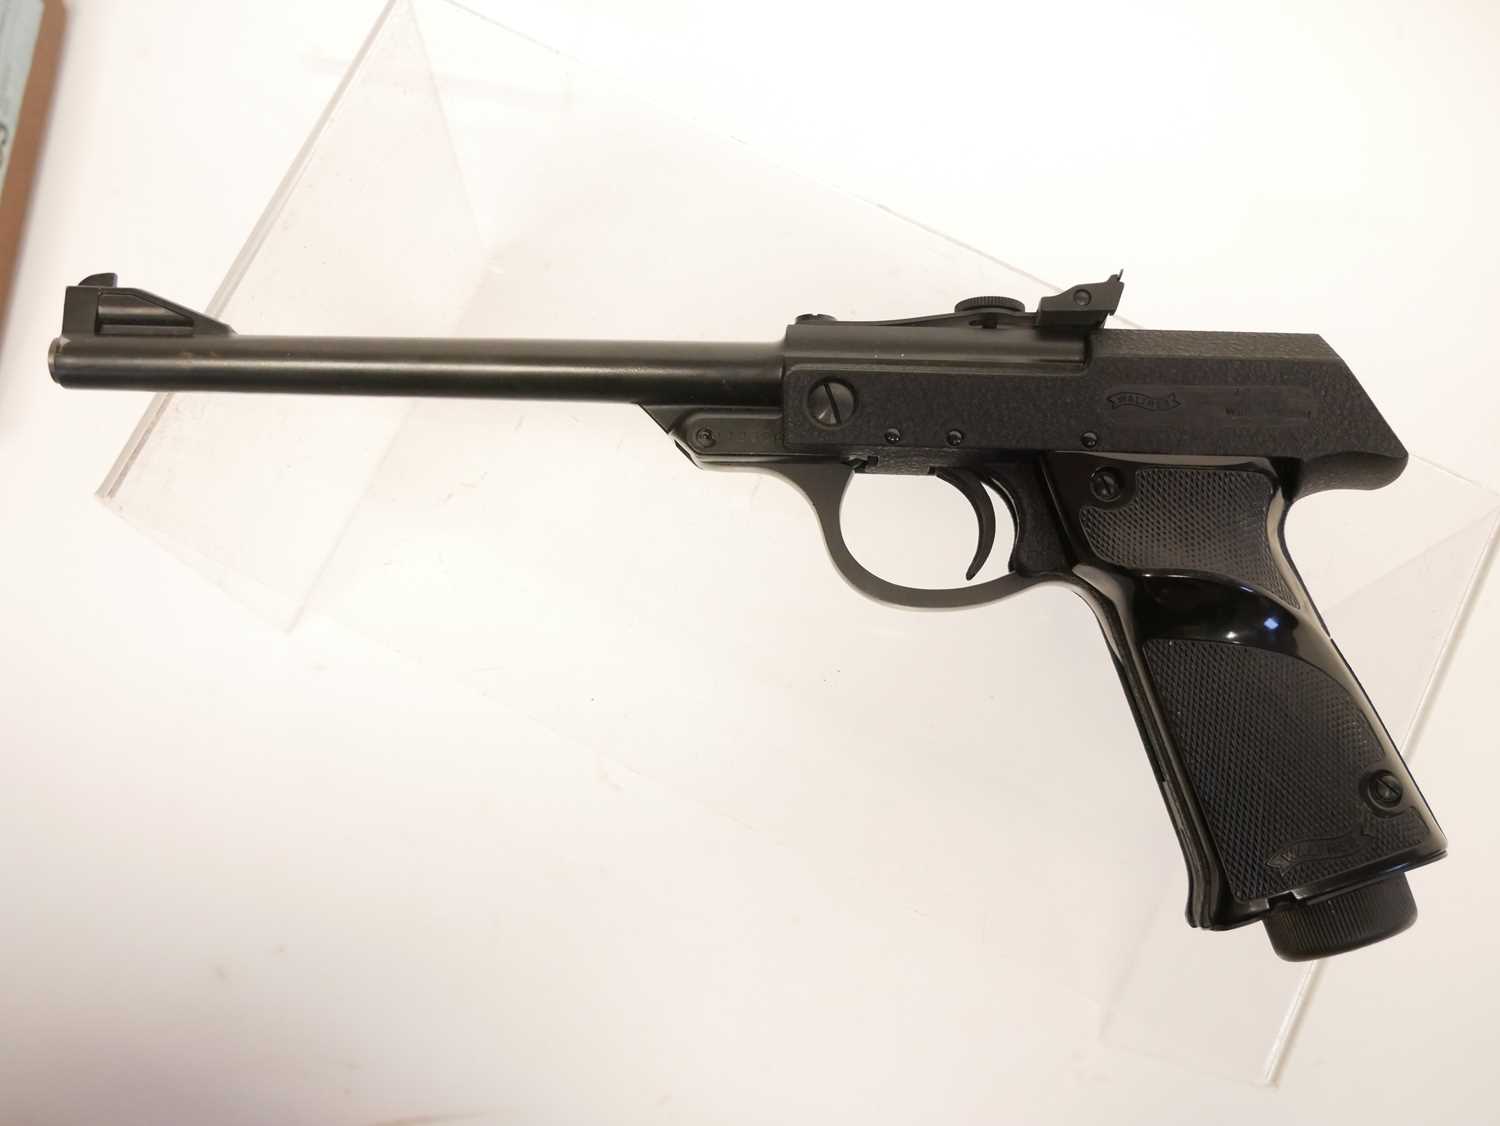 Boxed Walther .177 Model LP.53 air pistol (Luftpistole), 9.5inch barrel, serial number 118326, - Image 6 of 12